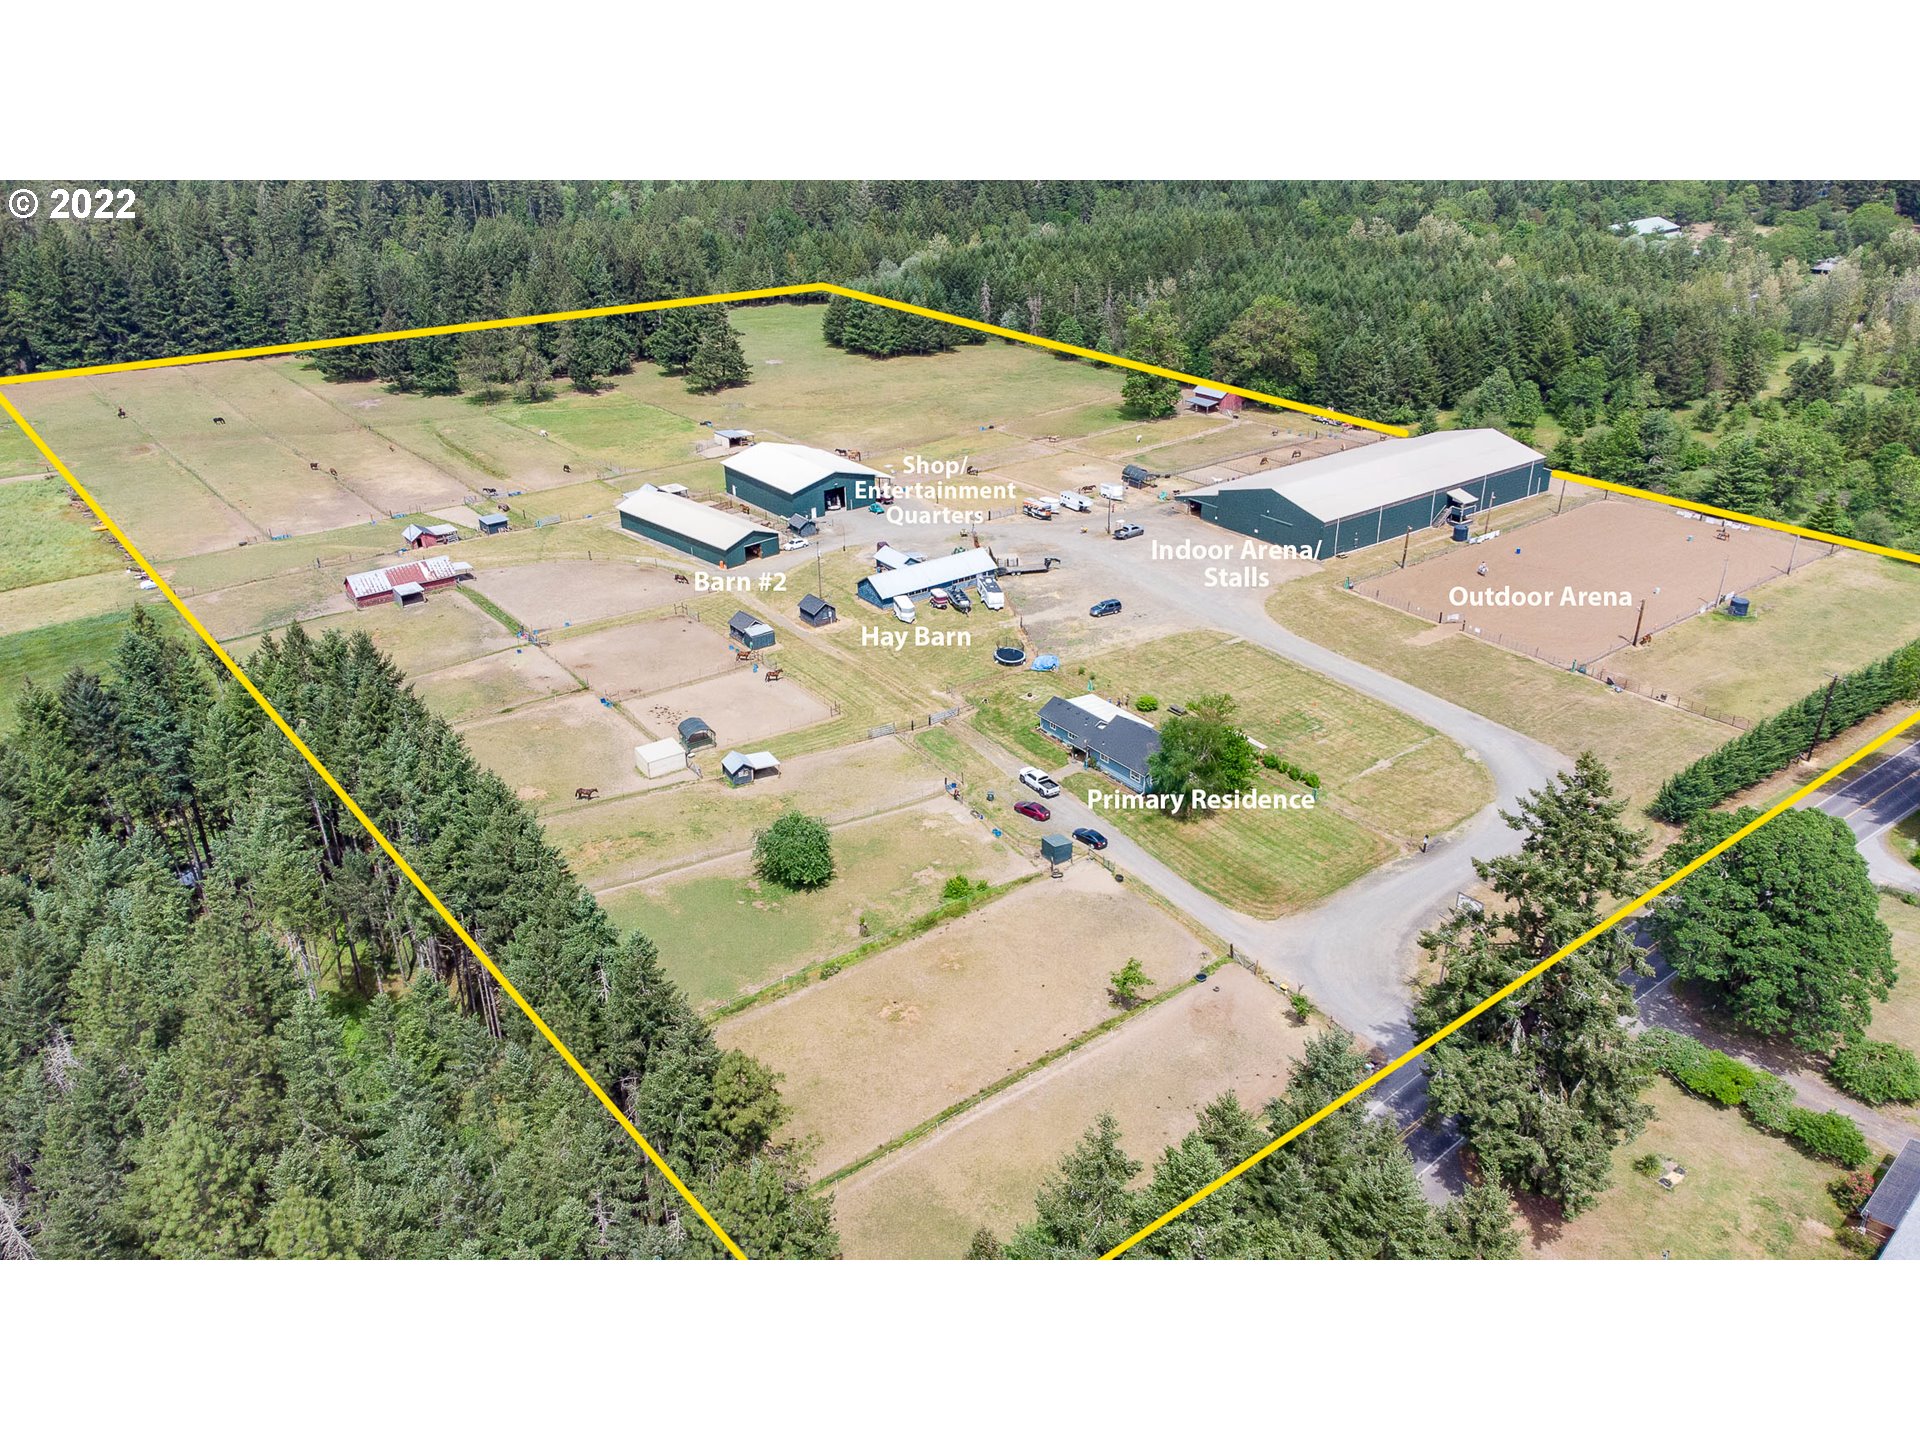 Income Producing Equestrian Facility! This F2 Zoned property includes 80' X 204' Indoor Arena, 130' X 260' Outdoor Arena, 84' X 72'Shop w/ Entertainment Quarters & Full Bath, 42-Fully Occupied 12X12 Stalls (5) w/Runs, 27 fully fenced turnouts 11 w/lean to's, Separate Hay Barn & Tool Shed.  This facility is TURNKEY, currently hosting barrel races w/ self-care & partial care boarding options. Home and property are move in ready, too many amenities to list. Ask for your full amenities list!